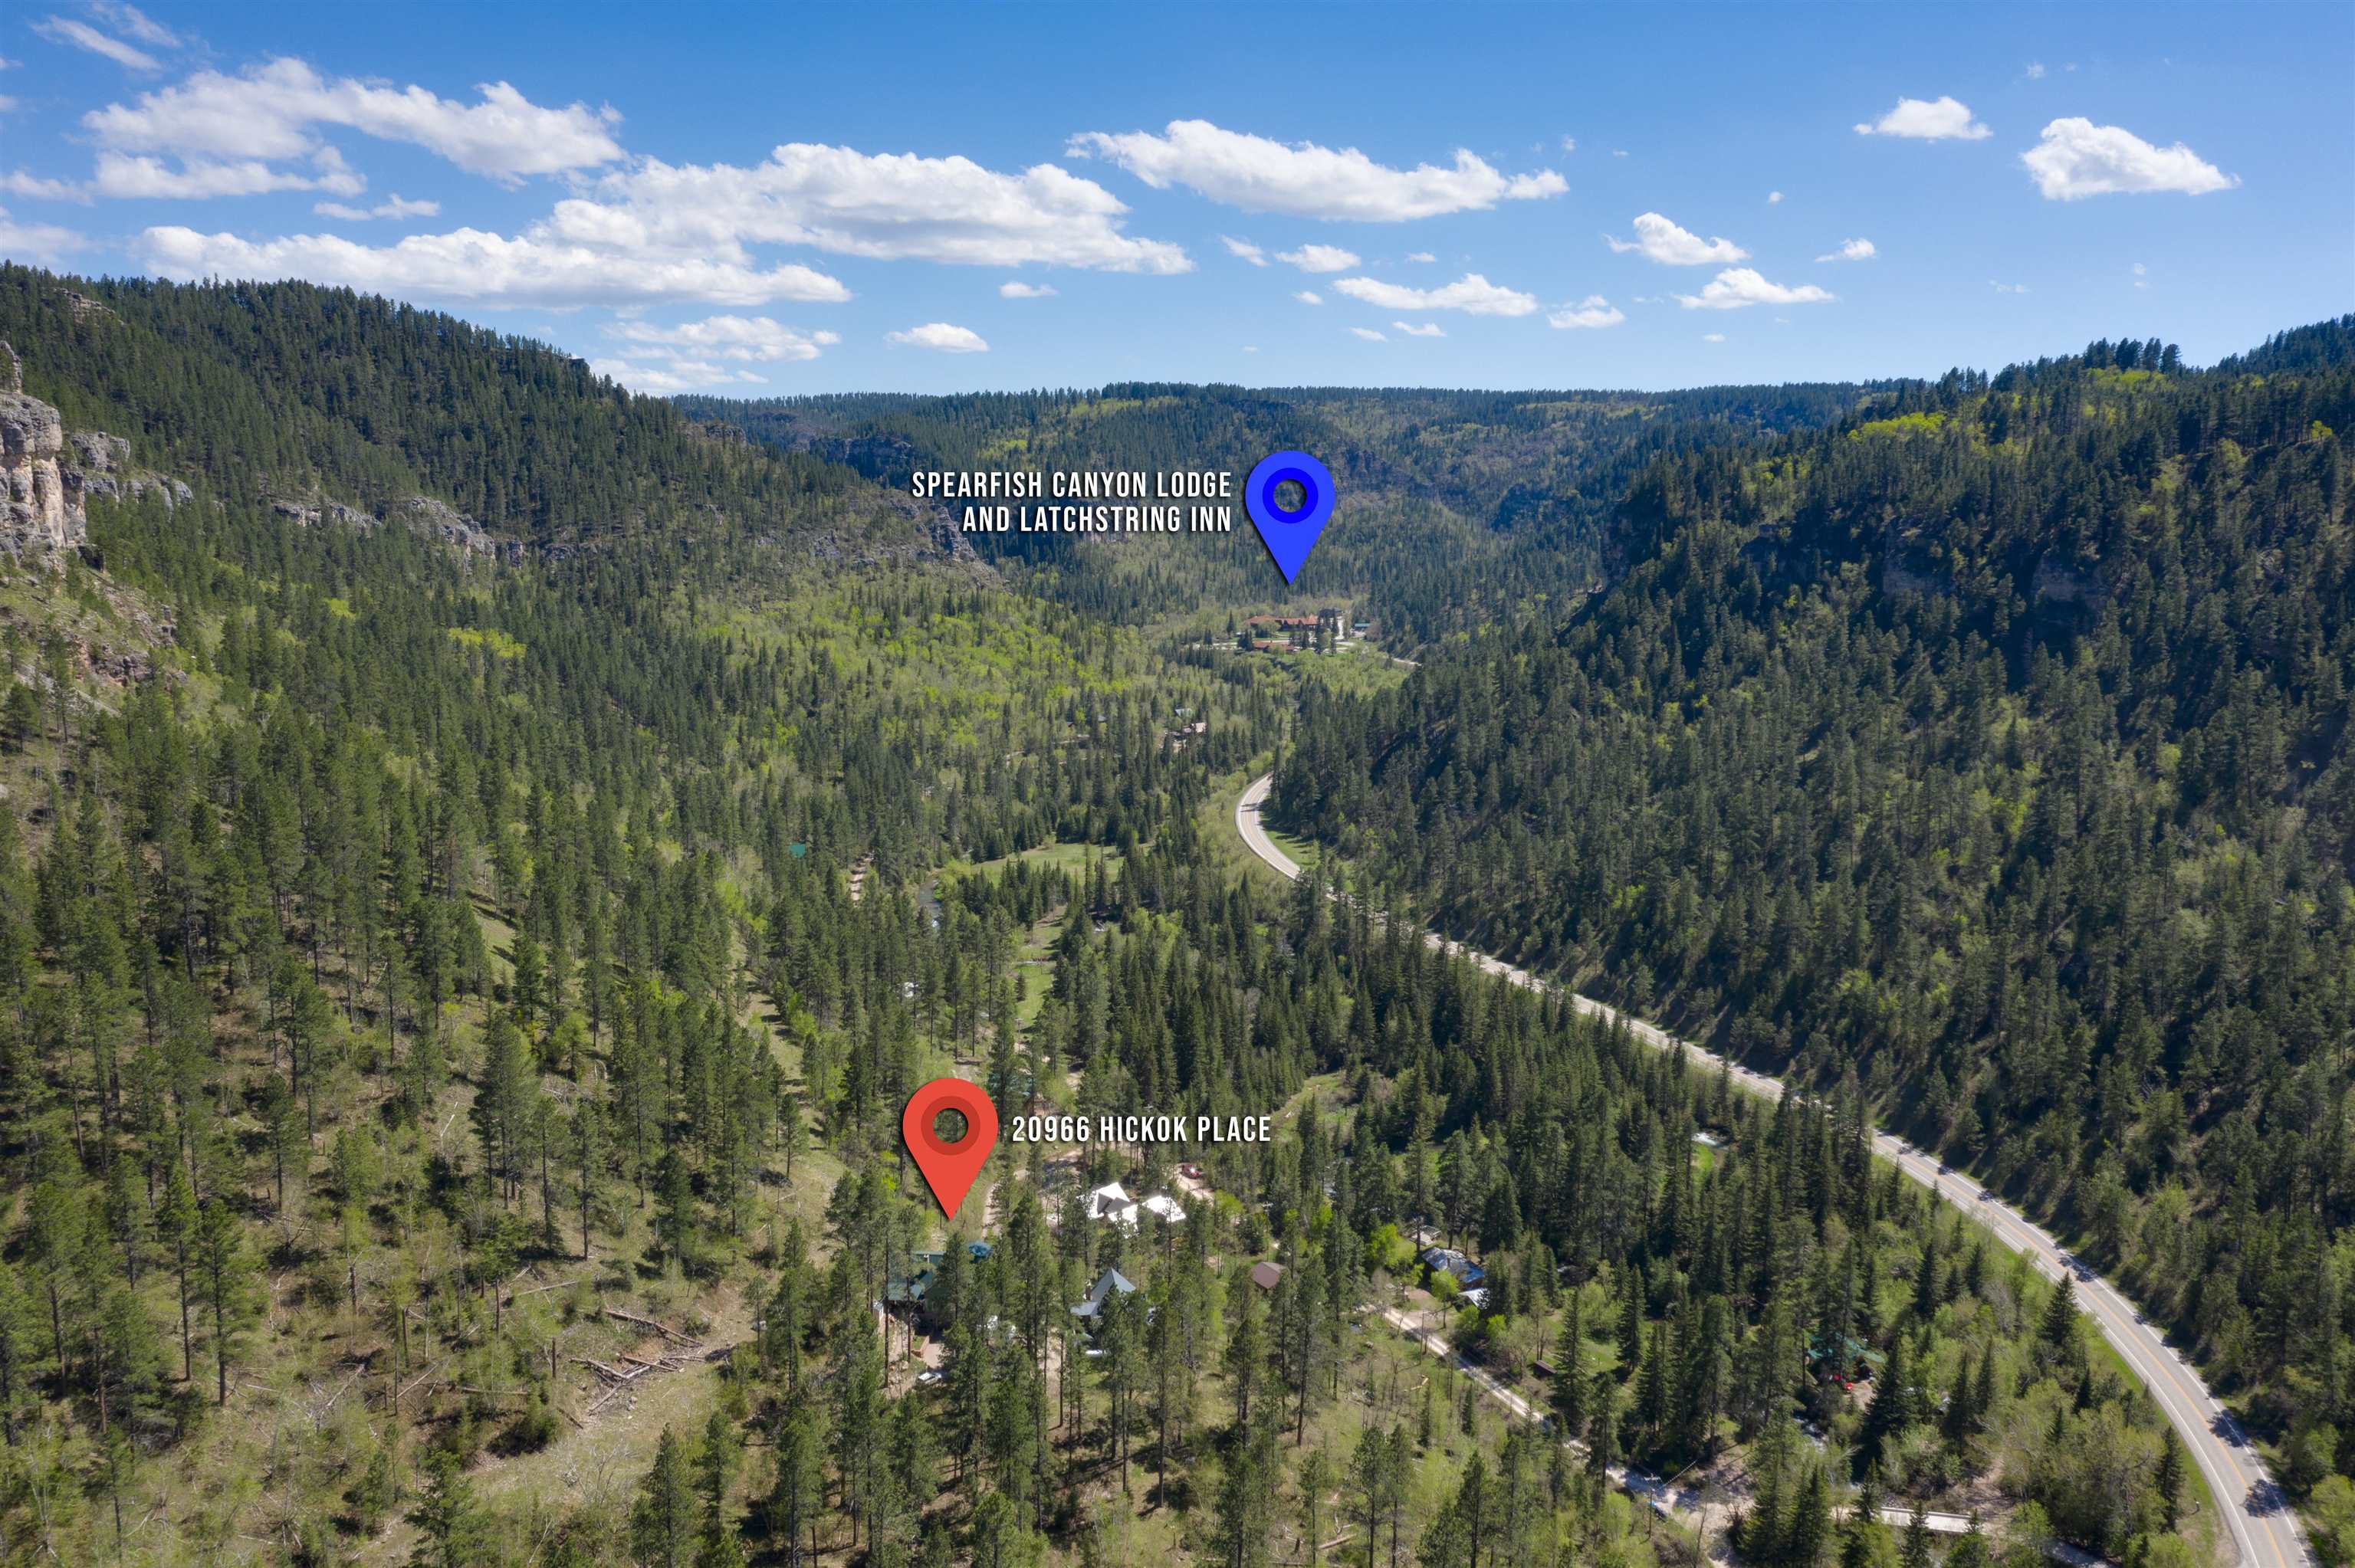 Close to Spearfish Canyon Lodge